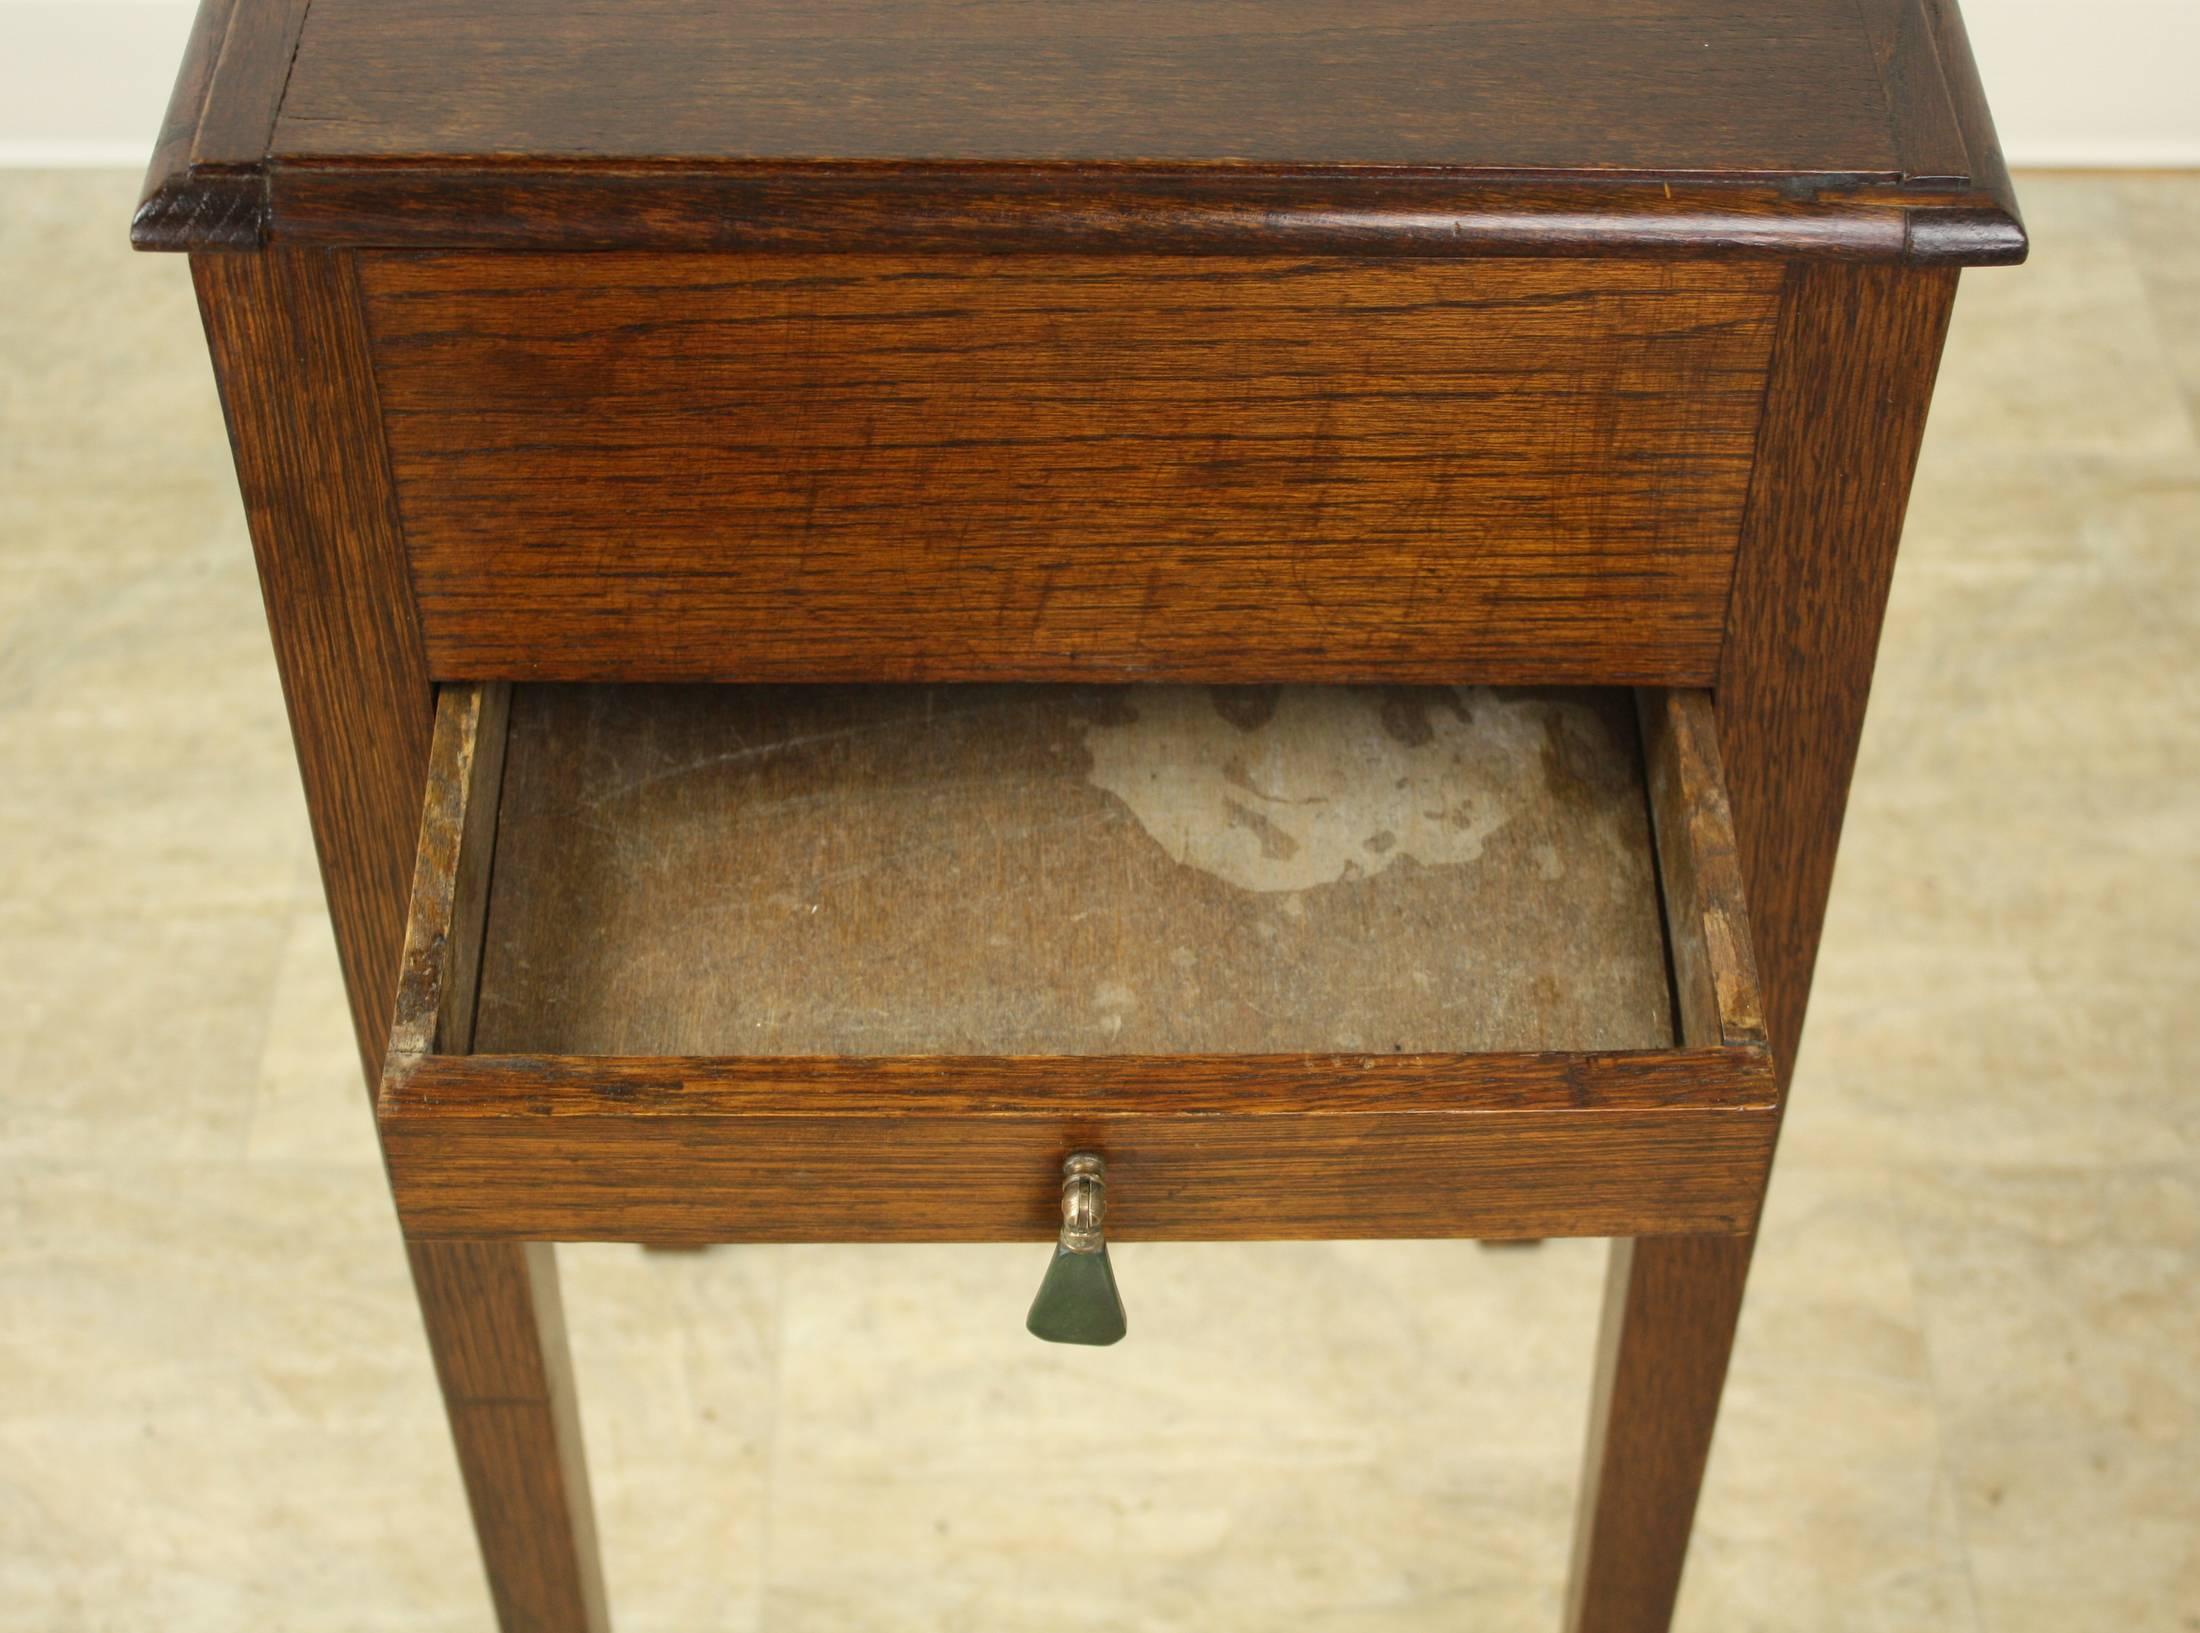 Oak English Arts and Crafts Sewing Box Side Table